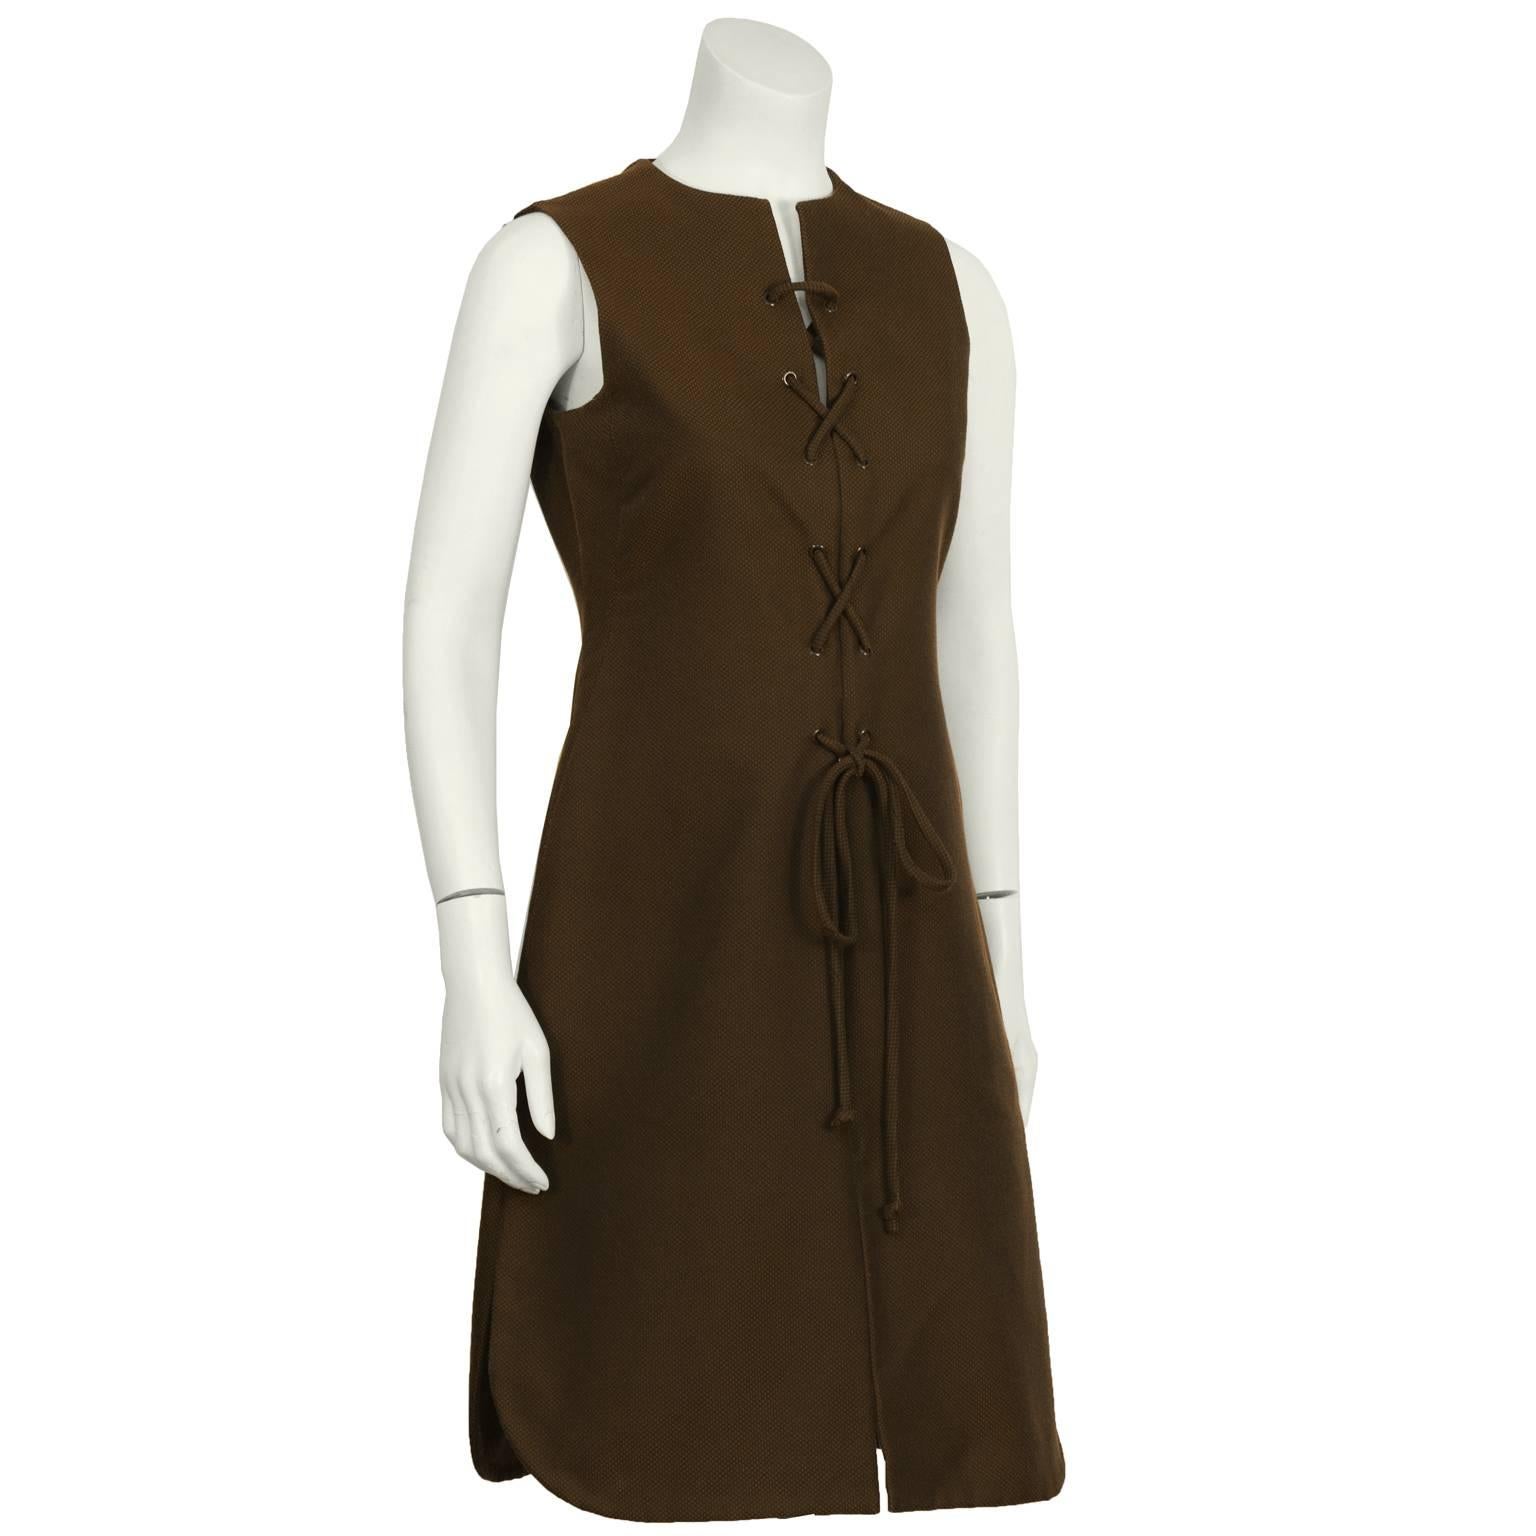 Early 1970’s Geoffrey Beene chocolate brown  cotton pique lace front day dress. The sleeveless slit neck dress features brown metal grommets around the front that allow for easy lacing. Slit in the front. Hem finished front and back tunic style with